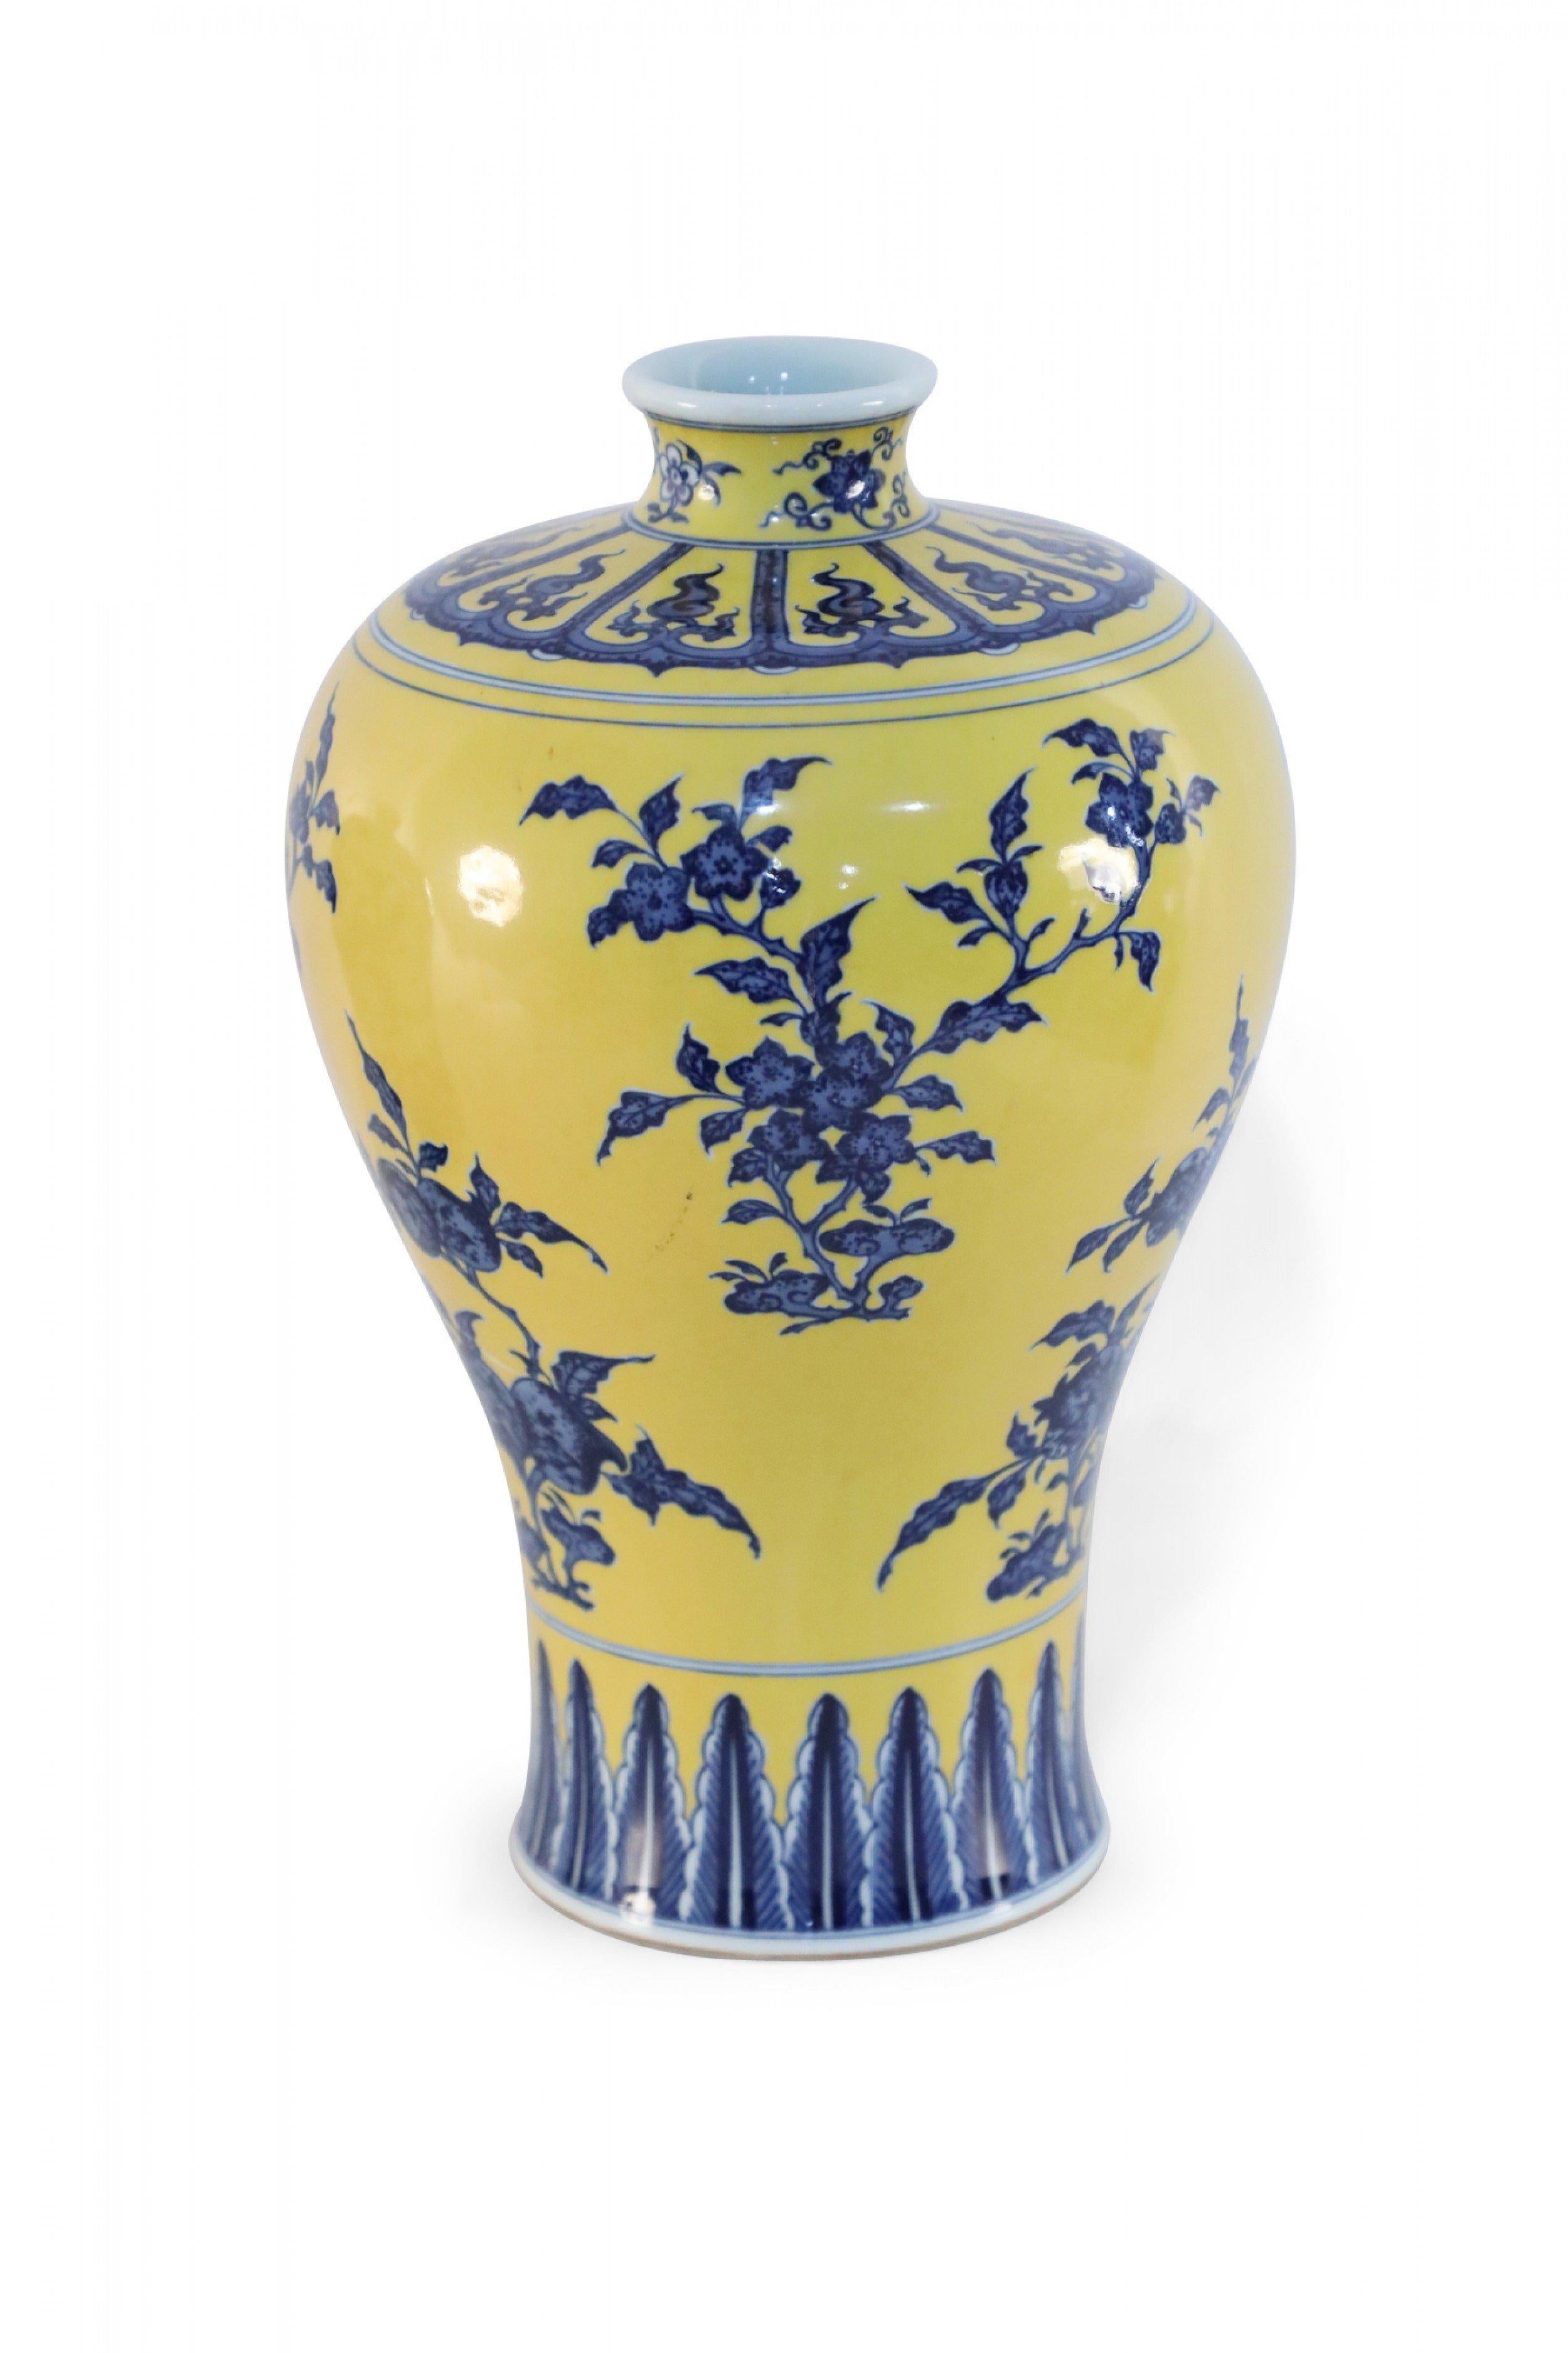 Antique Chinese (19th century) yellow porcelain Meiping vase decorated with blue florals and geometric bands around the top and the base (date mark on bottom, see photos).
    